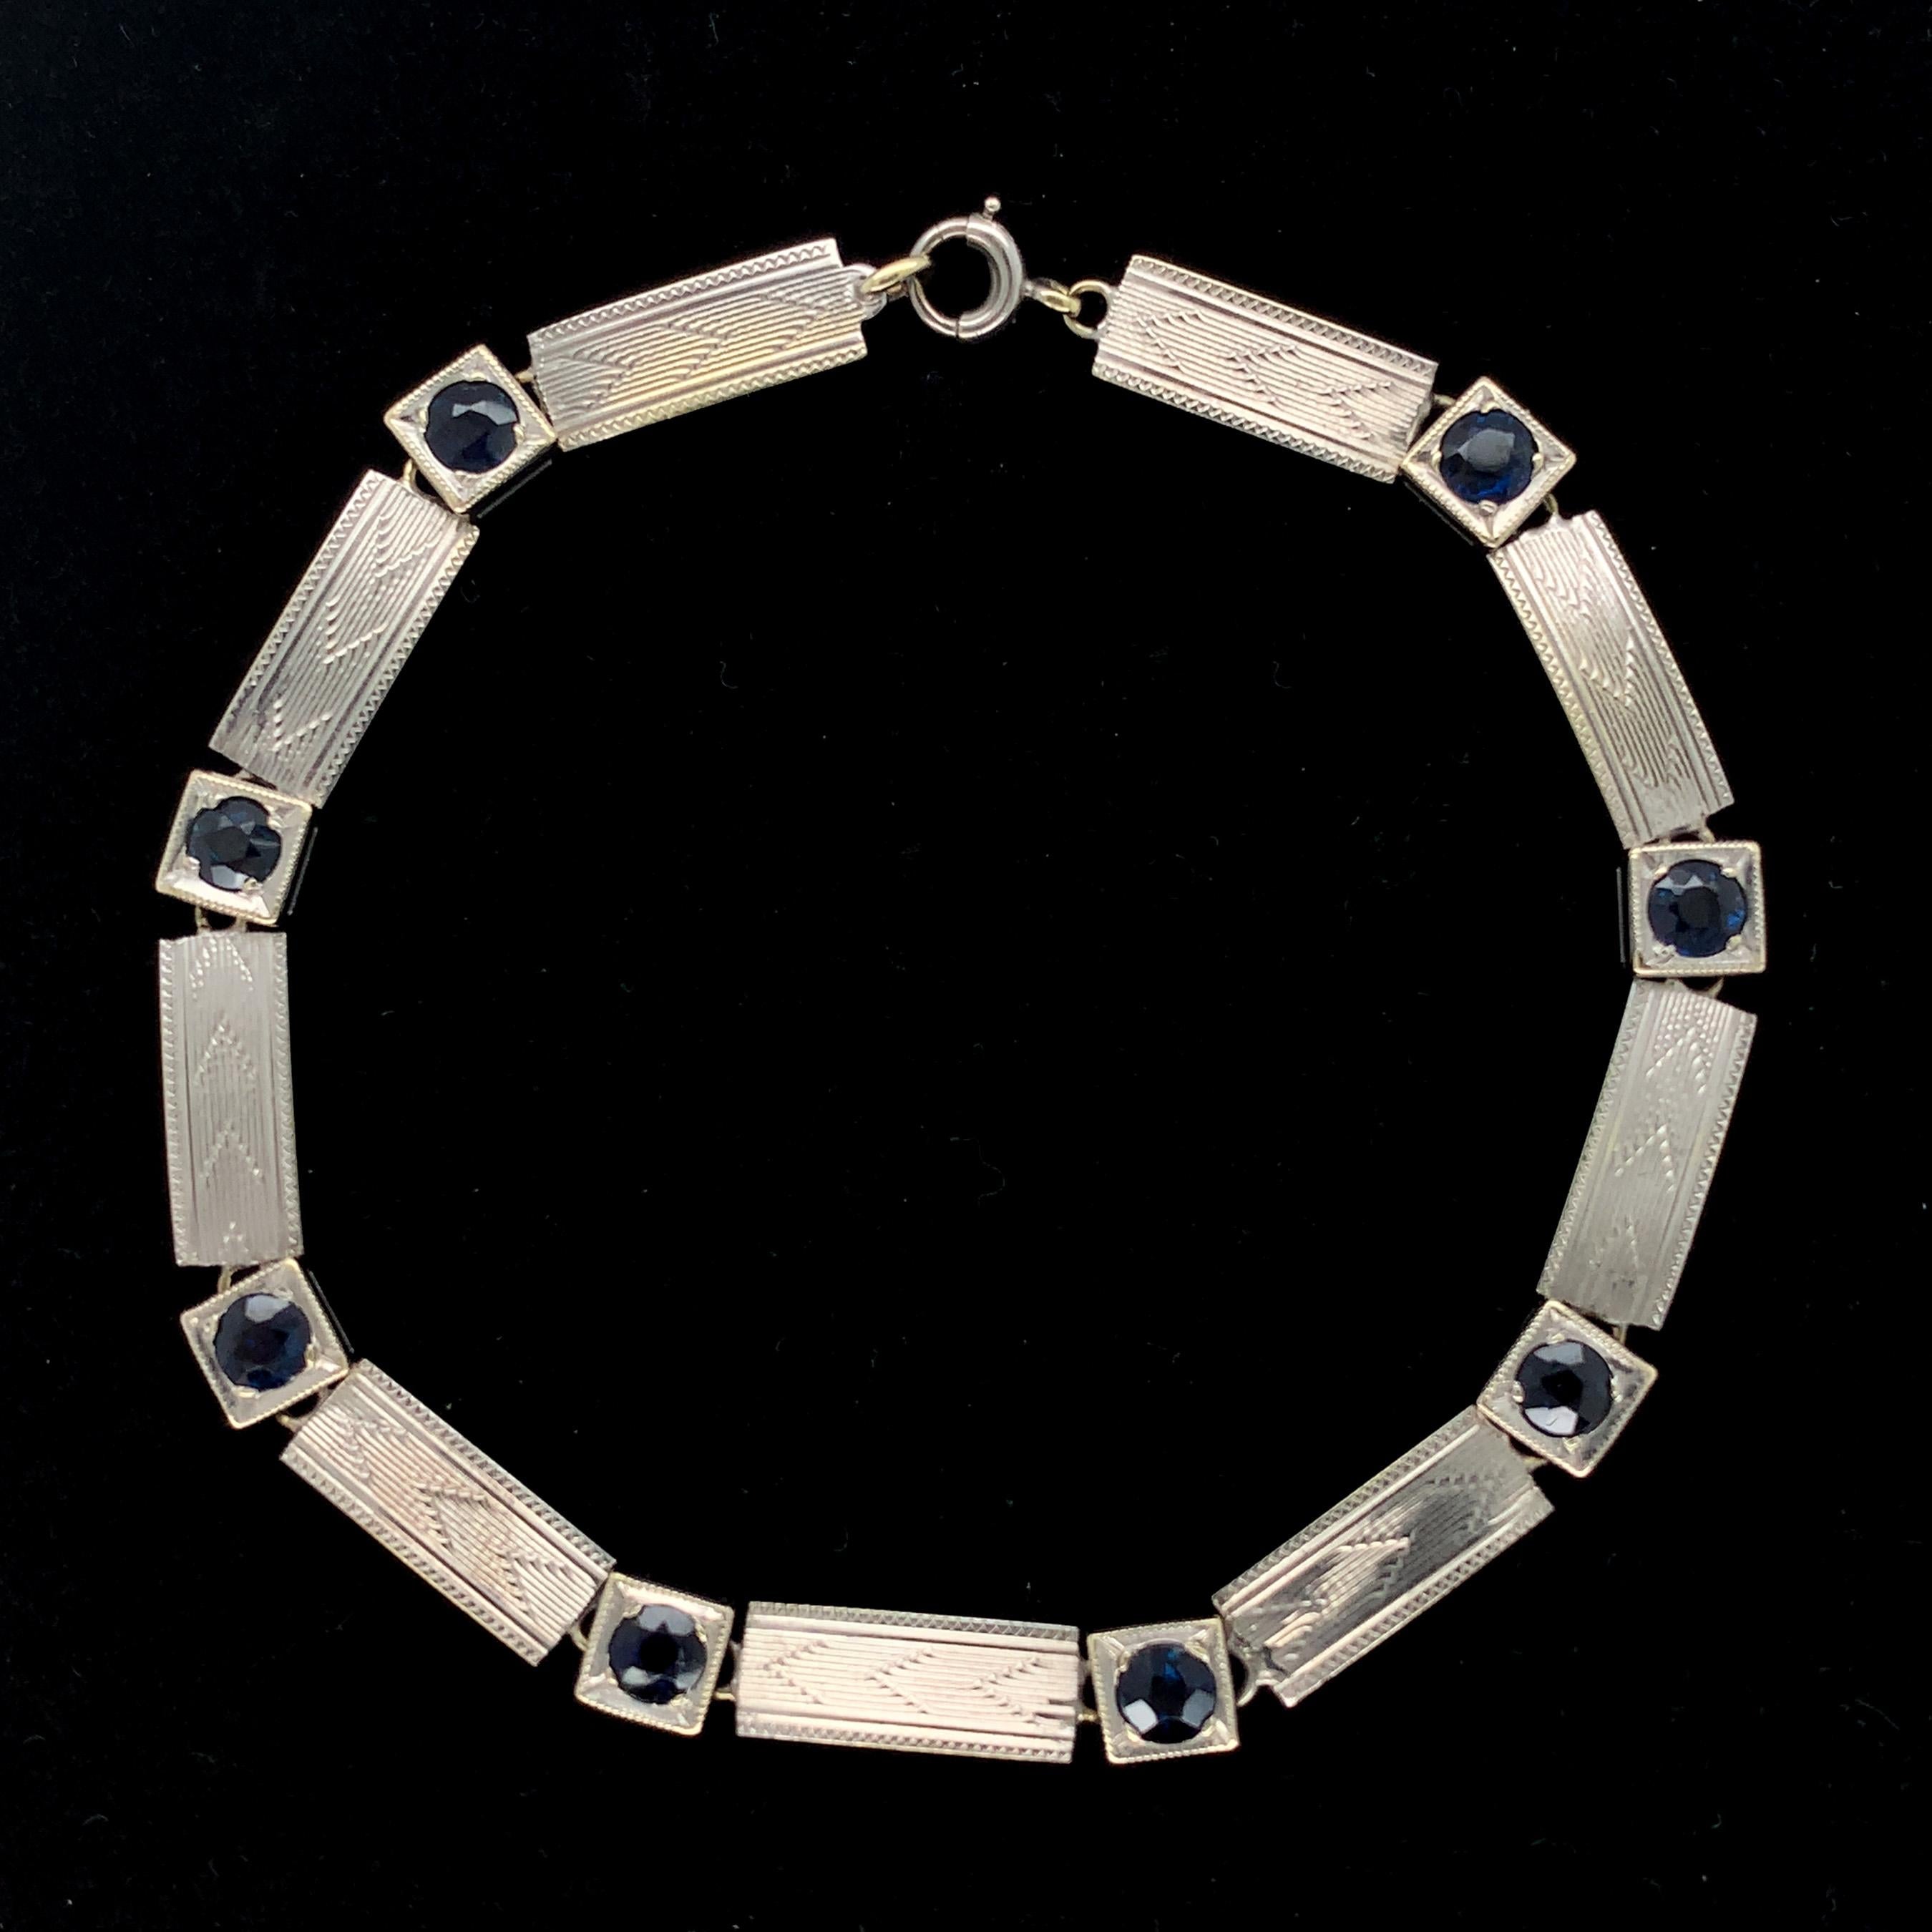 14K white gold bracelet with rectangular flat links with guilloche engraved design and round sapphires. There are 8 blue earth mined sapphires measuring about 3mm diameter. The unmarked bracelet tests 14K with a platinum top. The bracelet measures 7